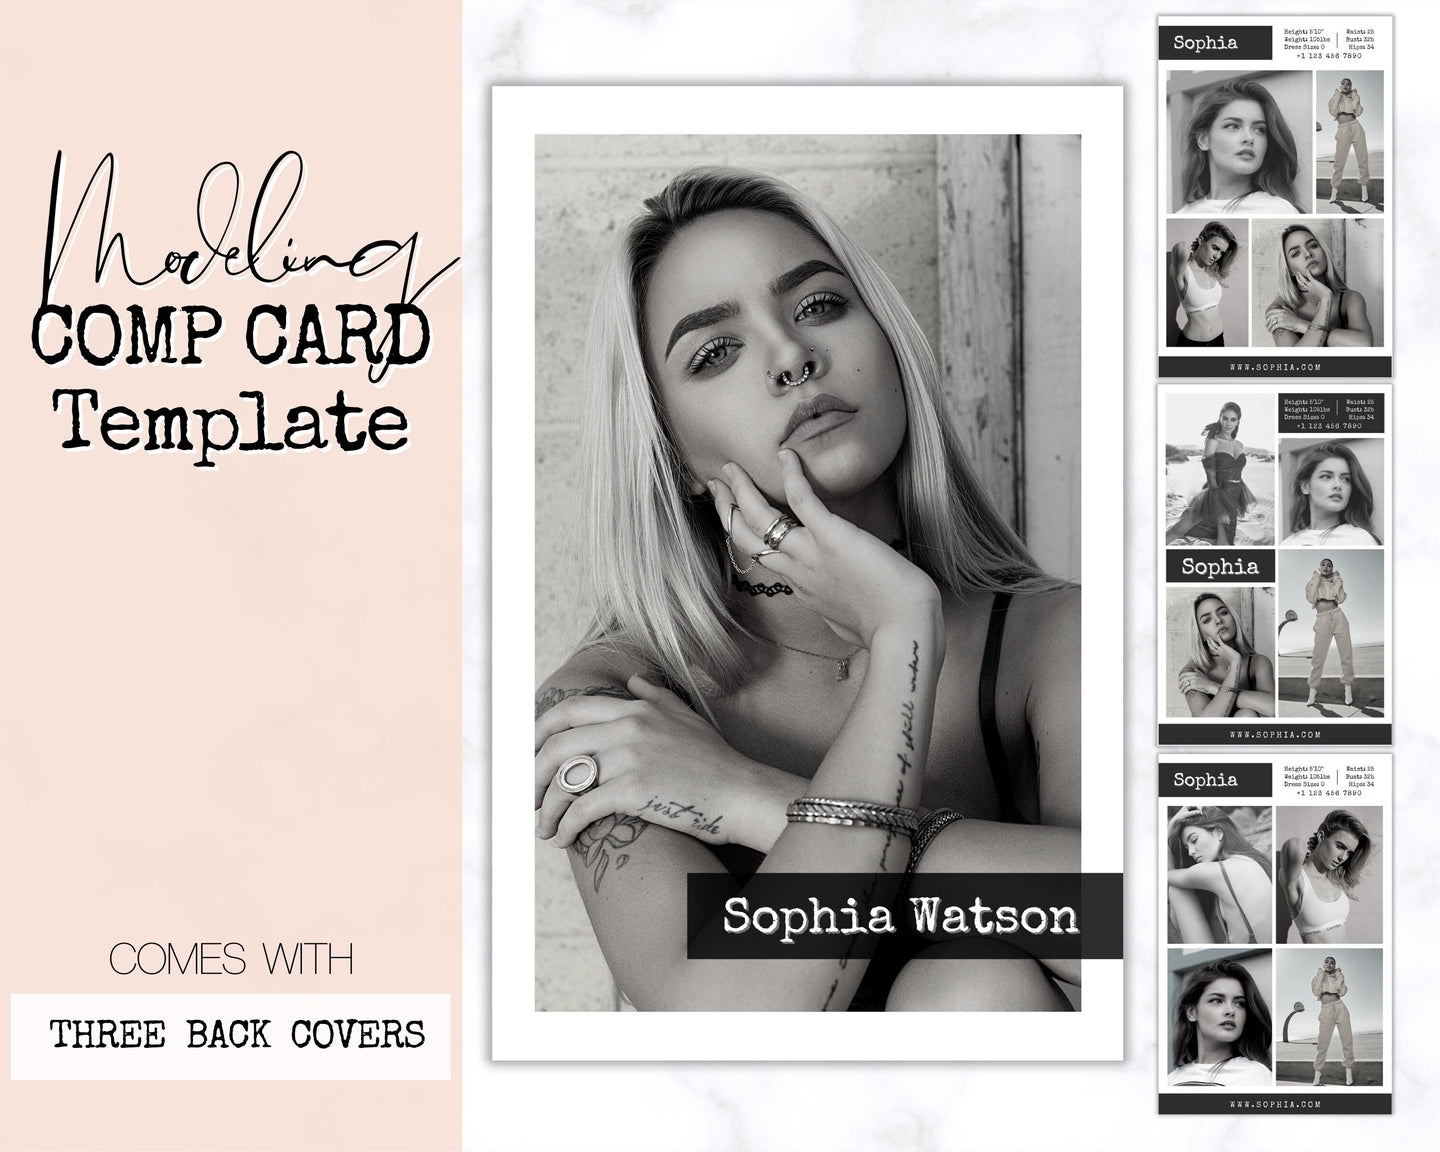 COMP CARD Template. Modeling Photocard! Zed Card for Models. Z Card. Fashion Resume Photo Card. Modeling Compcard Editable Canva Template | Style 1